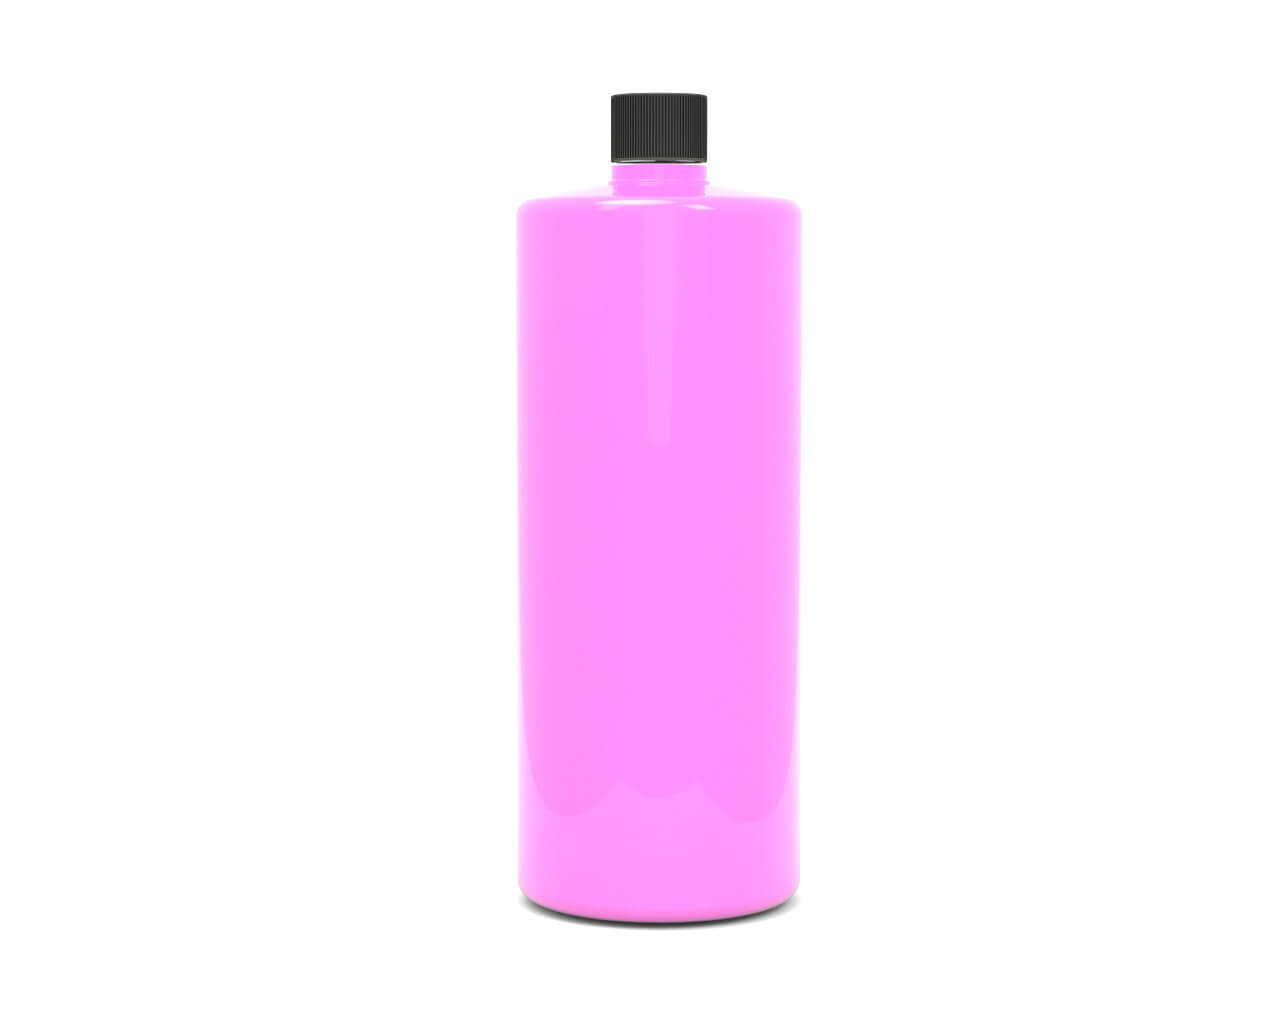 PrimoChill Opaque - Pre-Mix (32oz) - PrimoChill - KEEPING IT COOL Pink SX